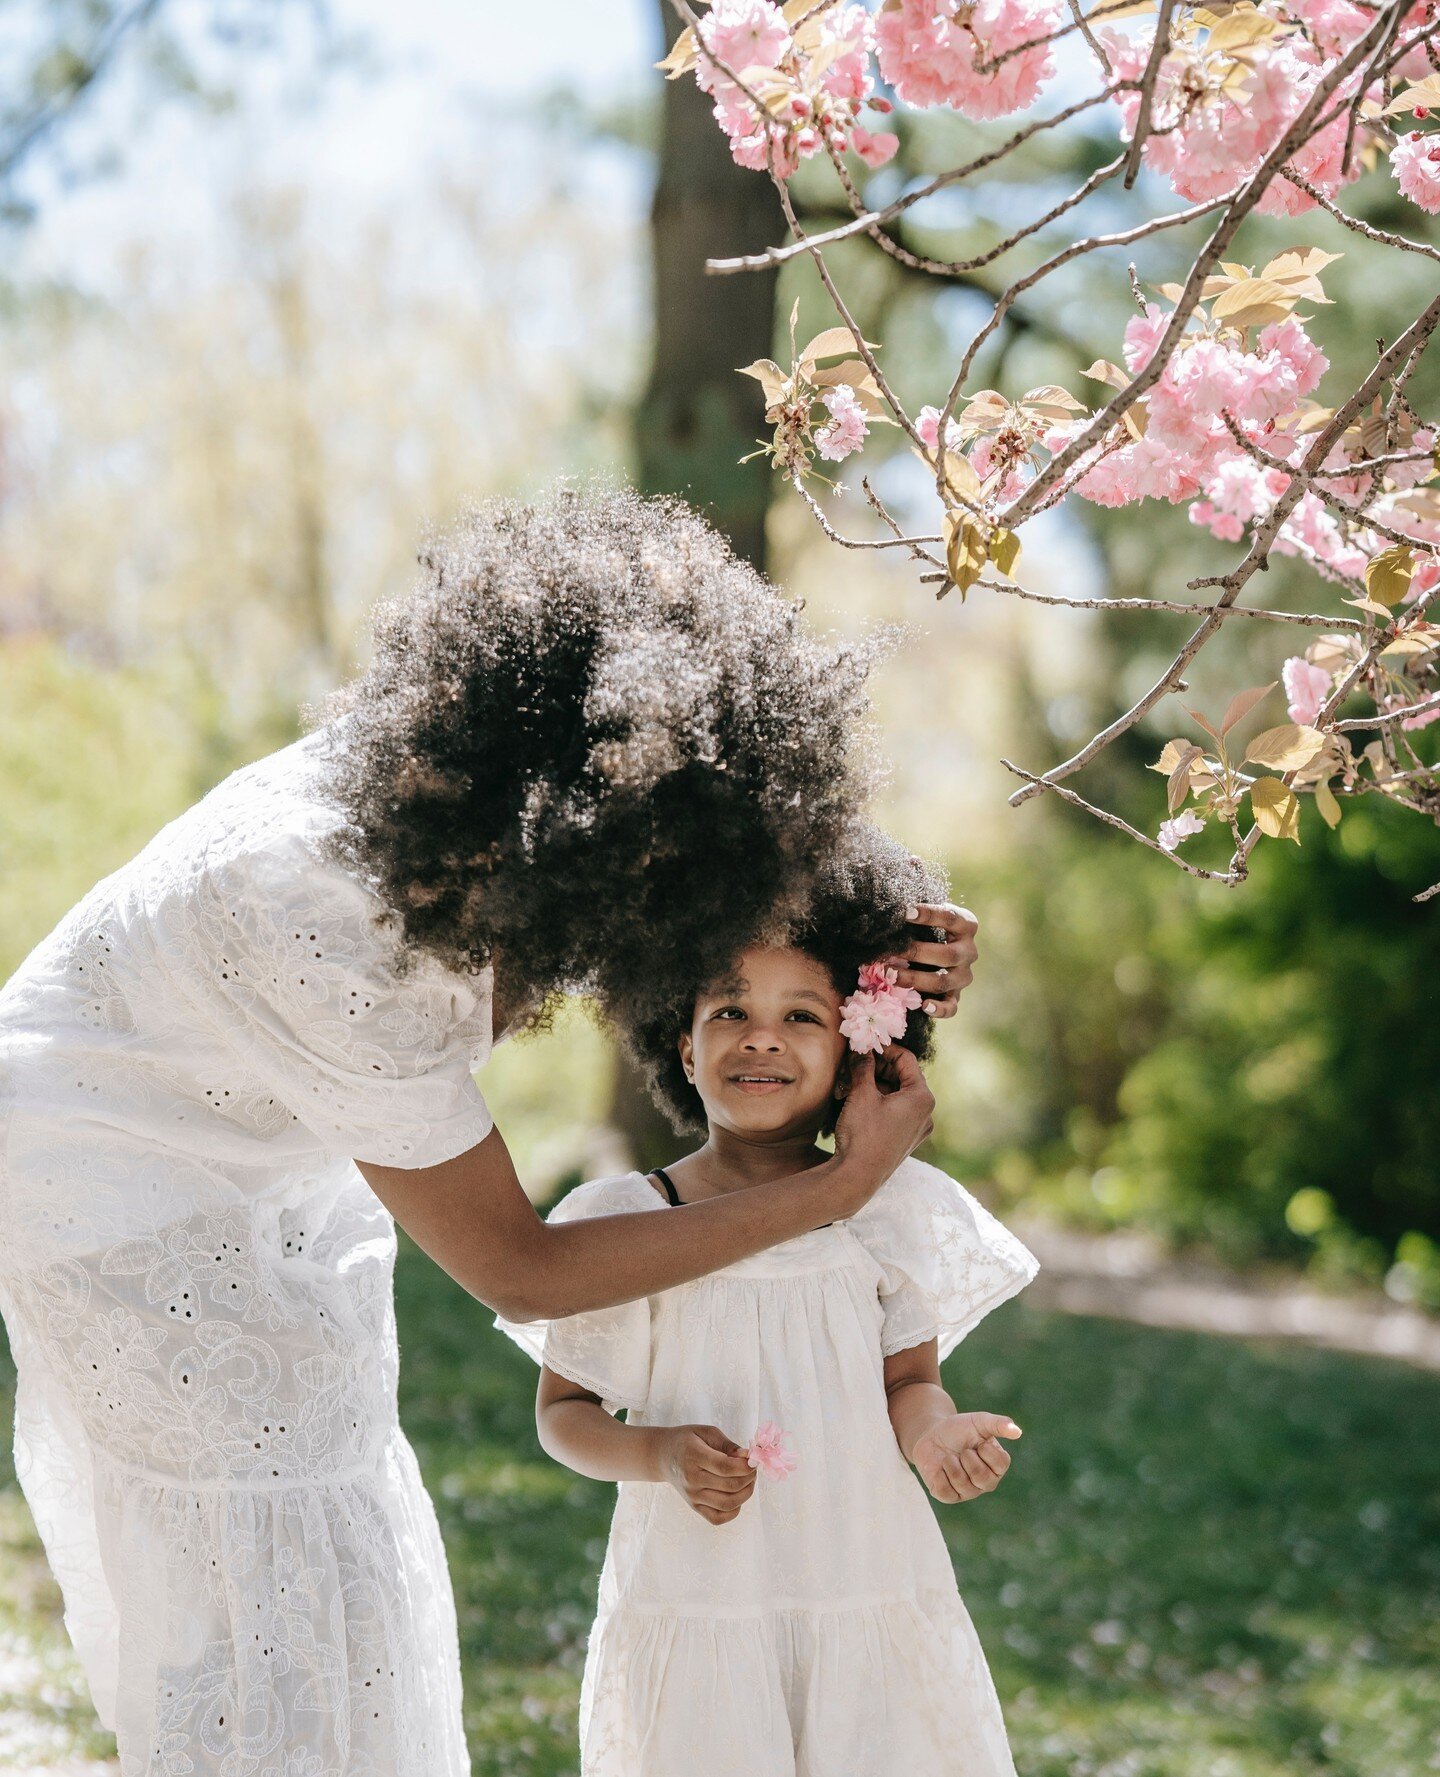 We are sending anyone who identifies as a mother, who dreams of being a mother or who misses their mother our love this Mother's Day. No matter what your circumstances are, remember that you are so loved. 💐💞🫶⁠
⁠
PS. Today is the final day for -10%